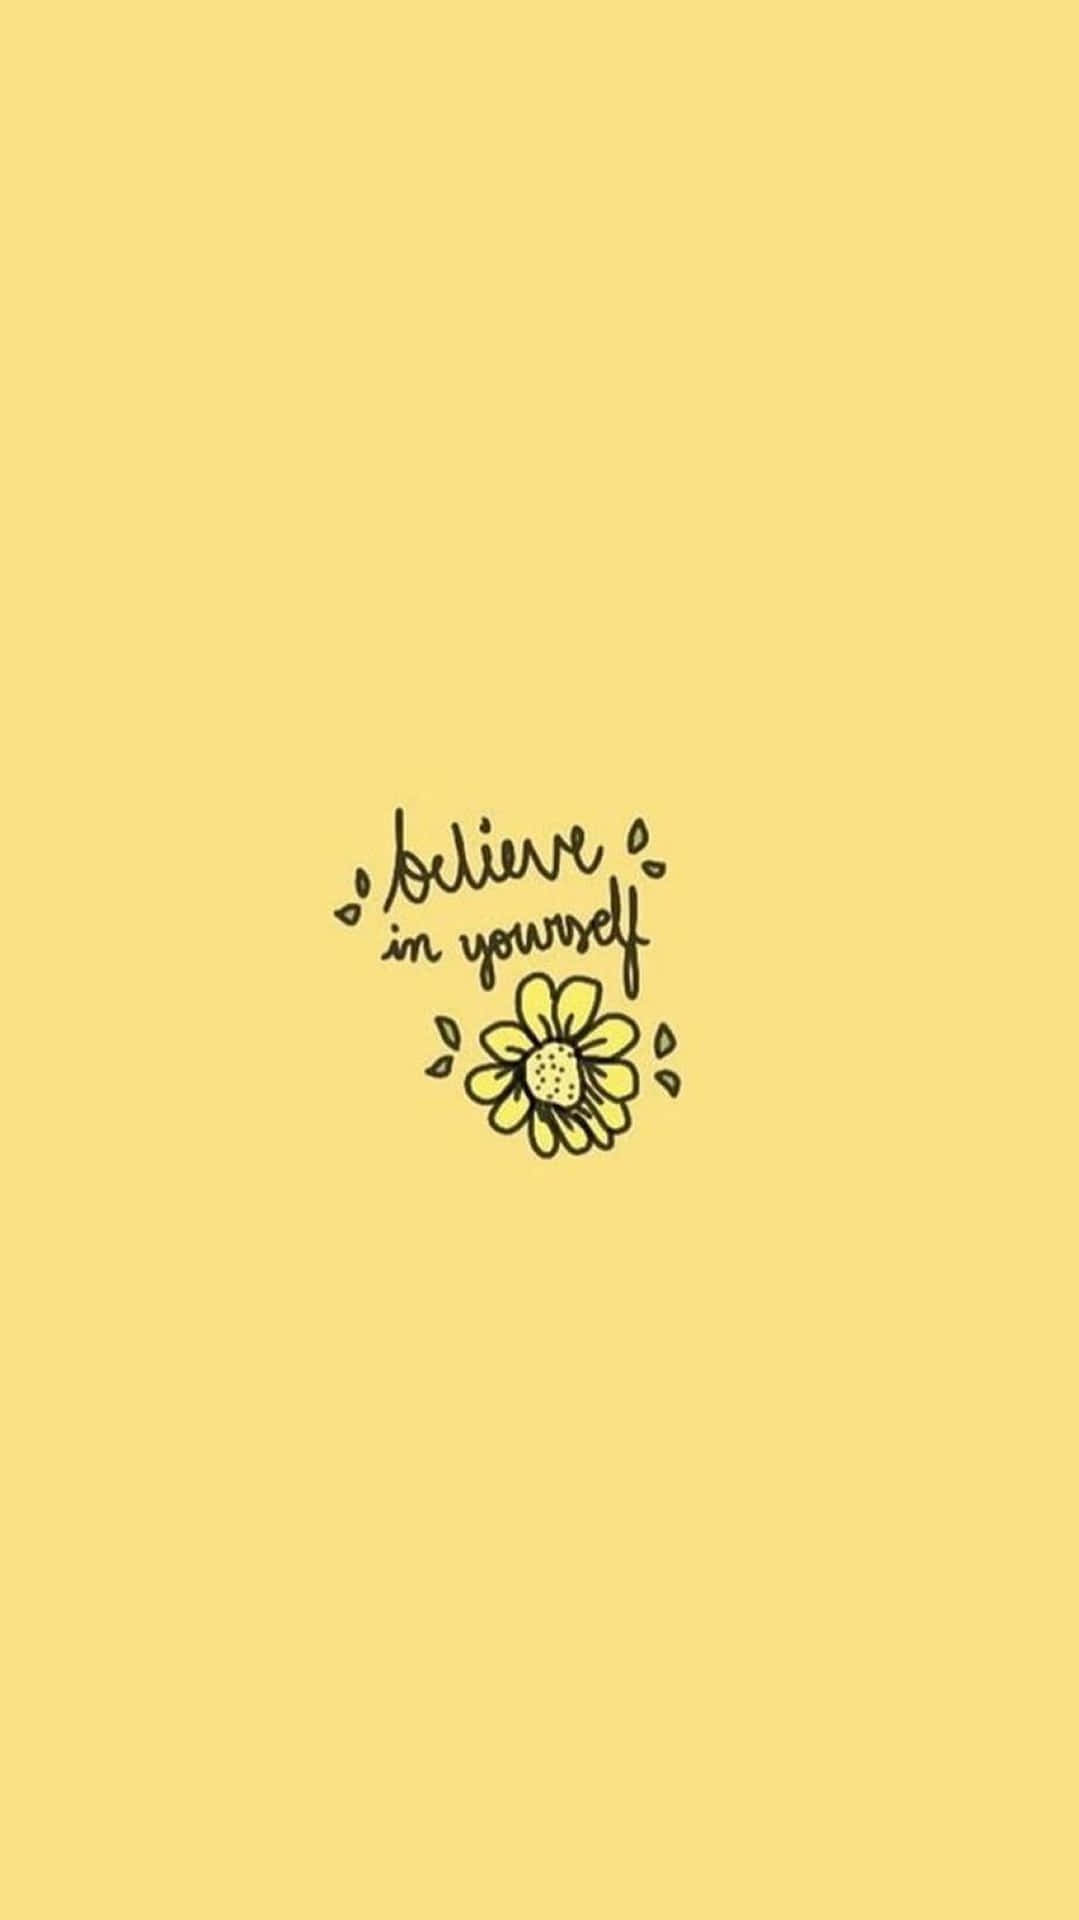 Believe In Yourself Floral Quote Aesthetic.jpg Wallpaper